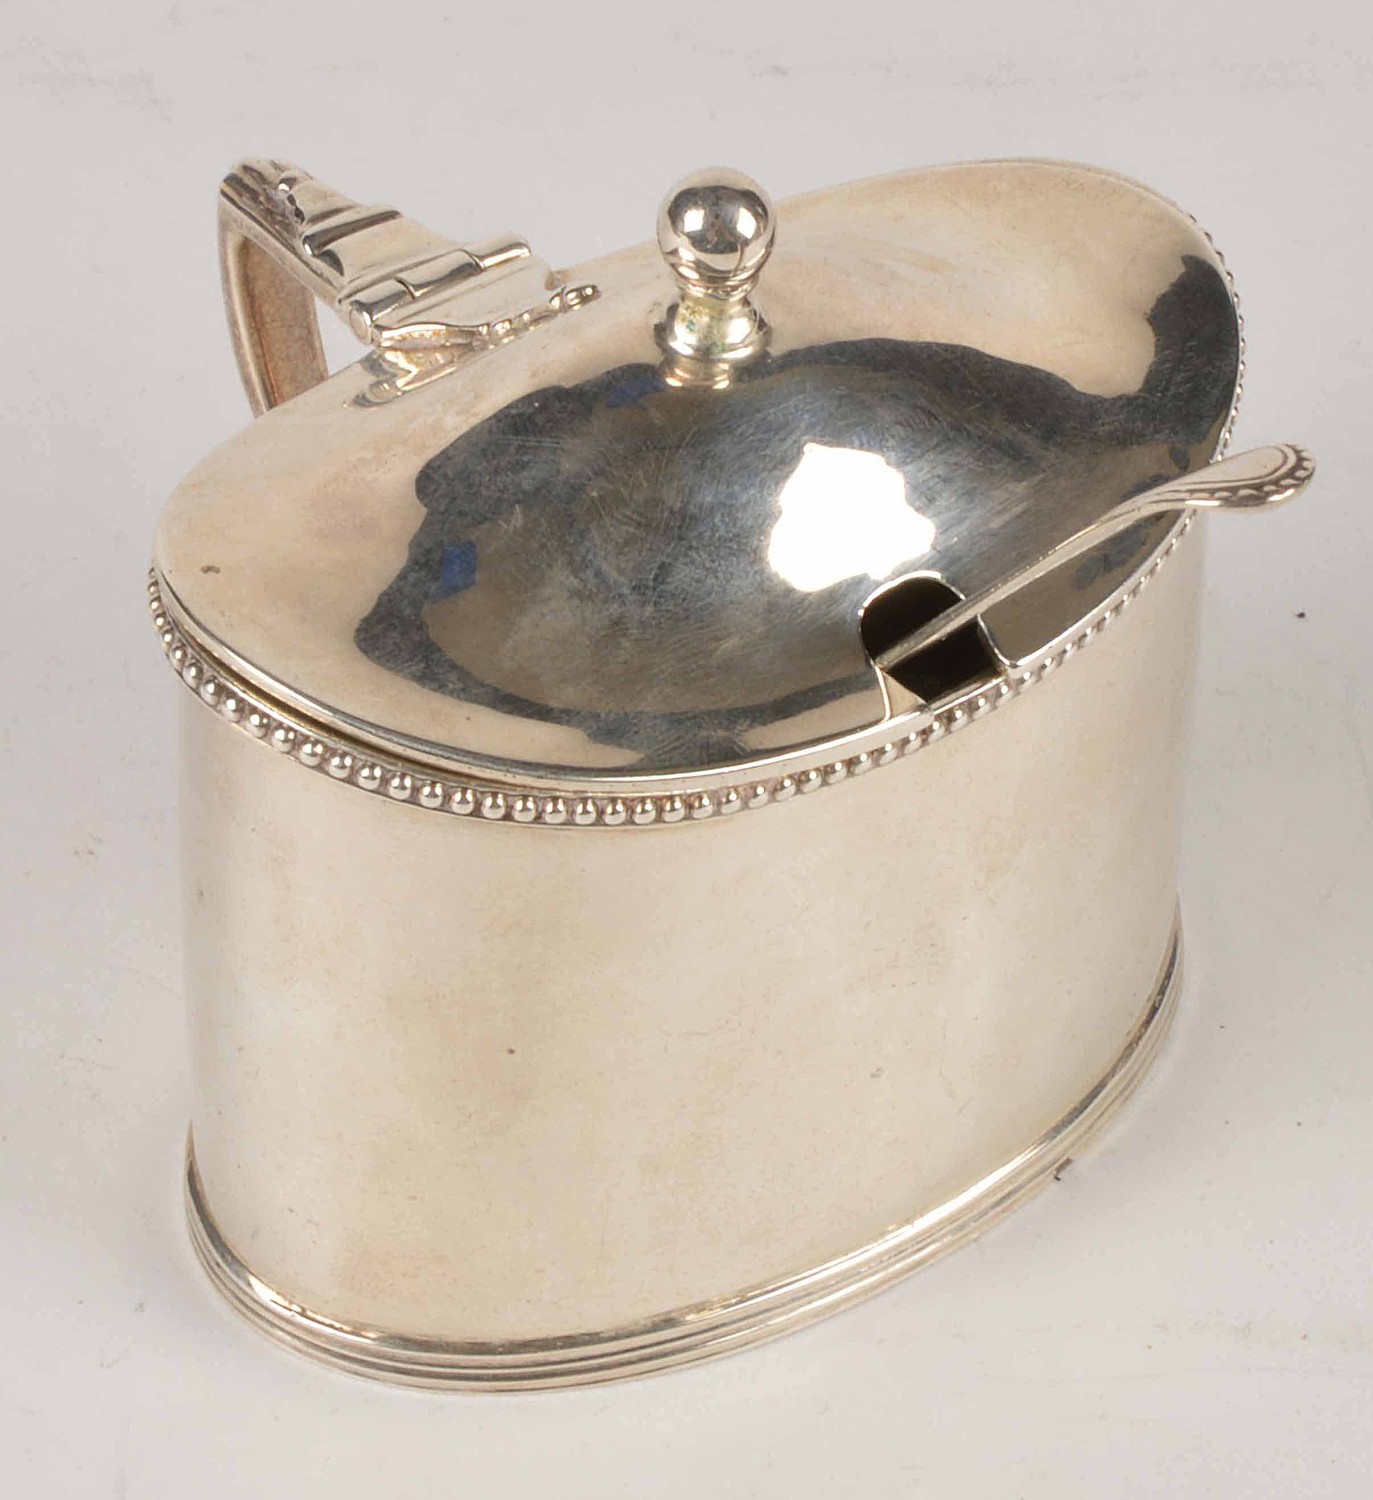 A Victorian silver oval mustard pot by Charles Boyton, London 1886, with a ball finial, a beaded